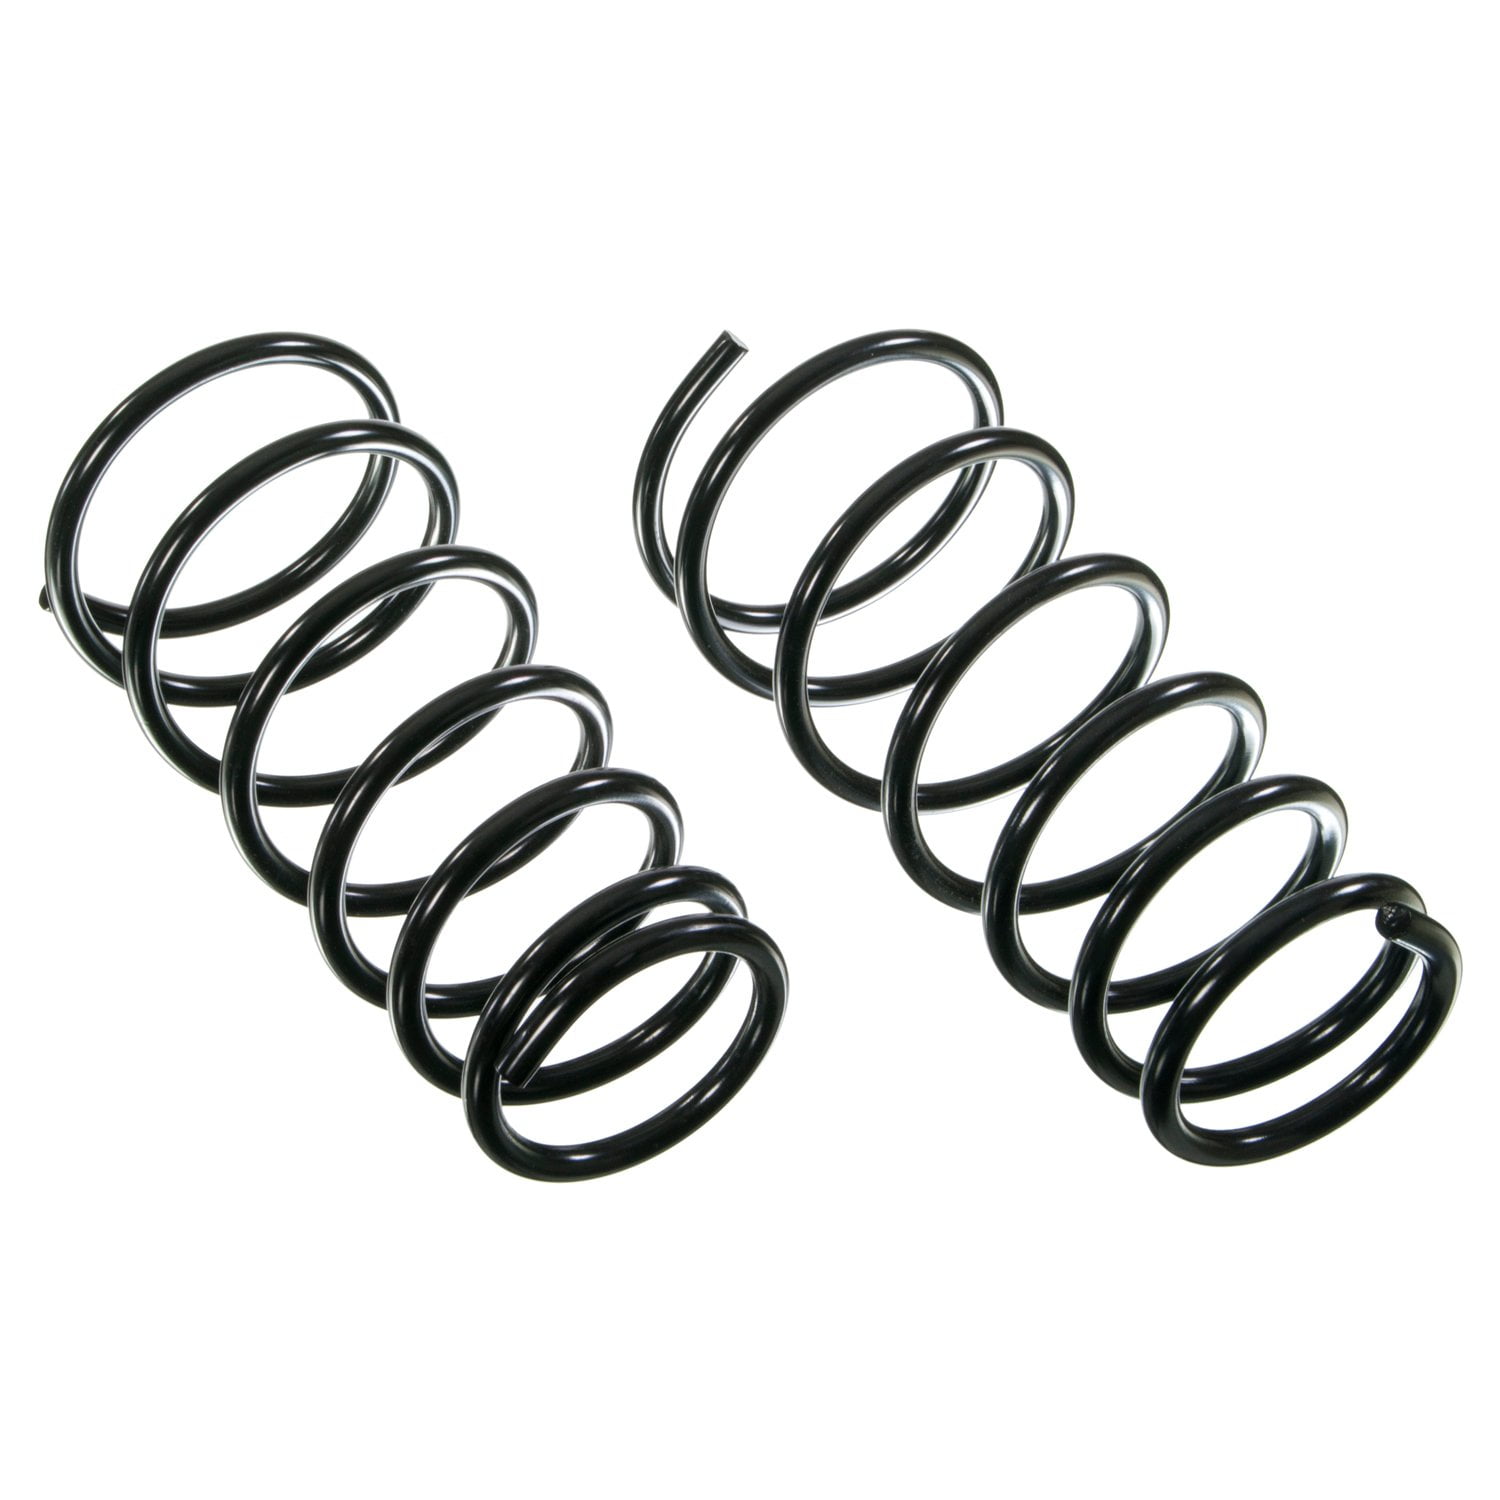 Toyota 48131-AE030 Coil Spring